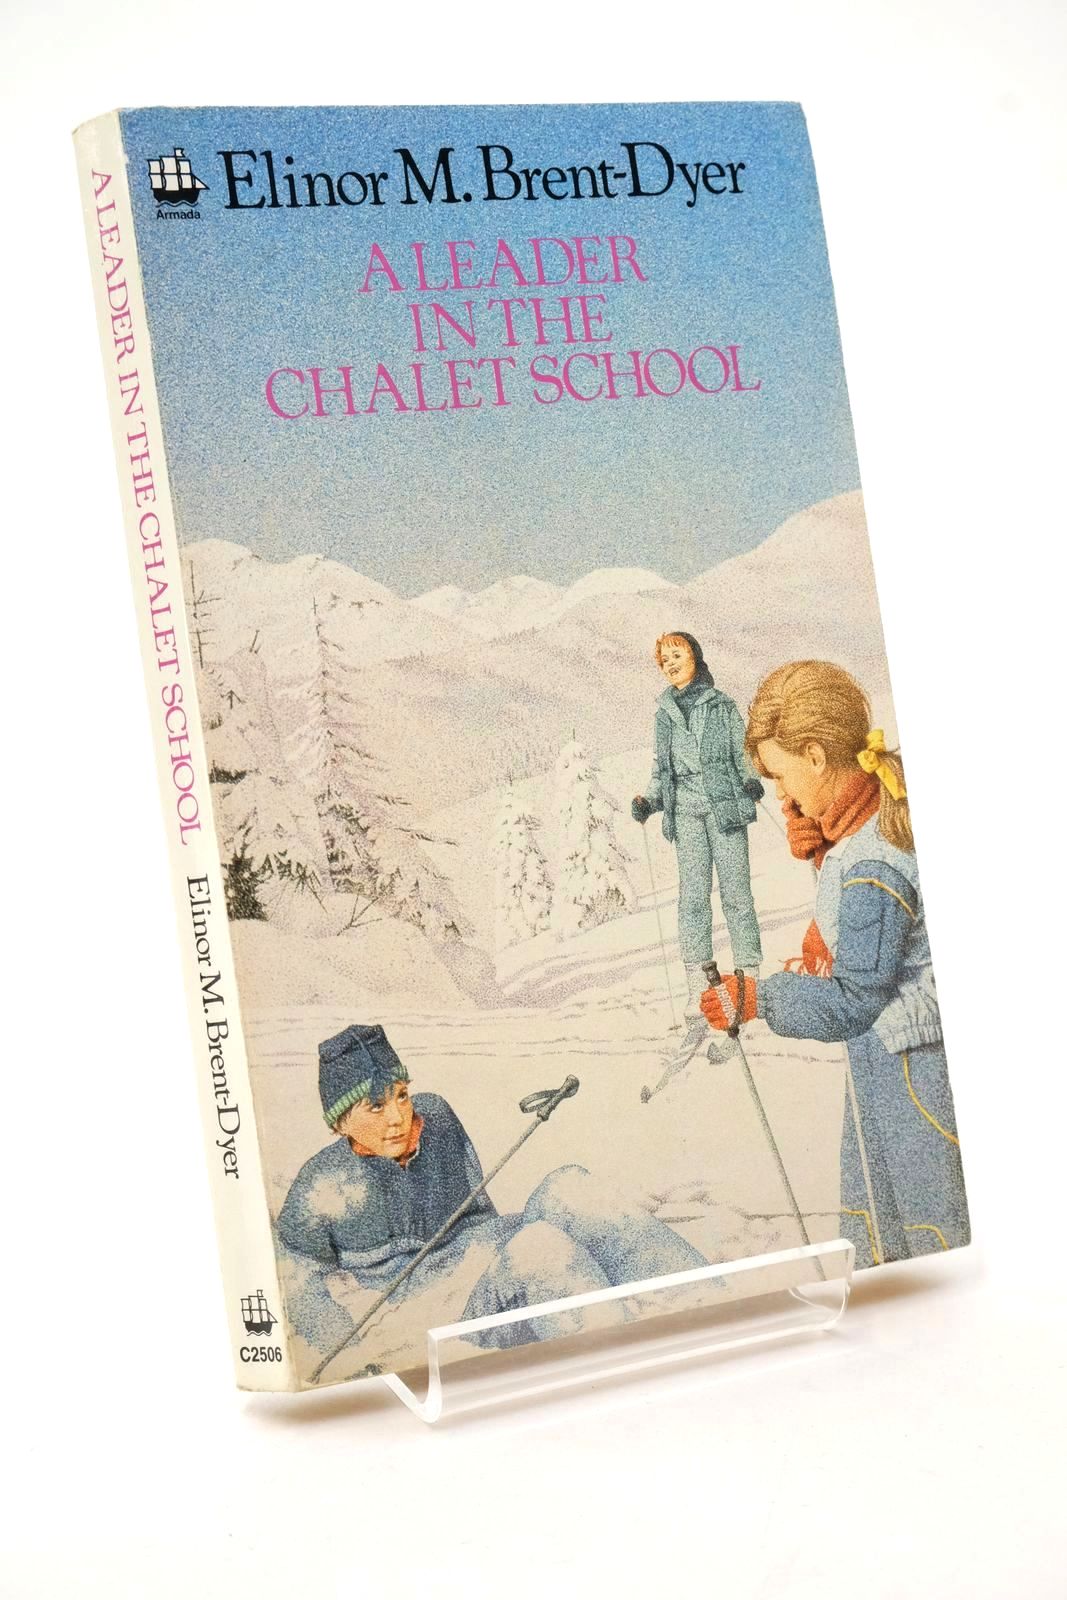 Photo of A LEADER IN THE CHALET SCHOOL written by Brent-Dyer, Elinor M. published by Armada (STOCK CODE: 1322561)  for sale by Stella & Rose's Books